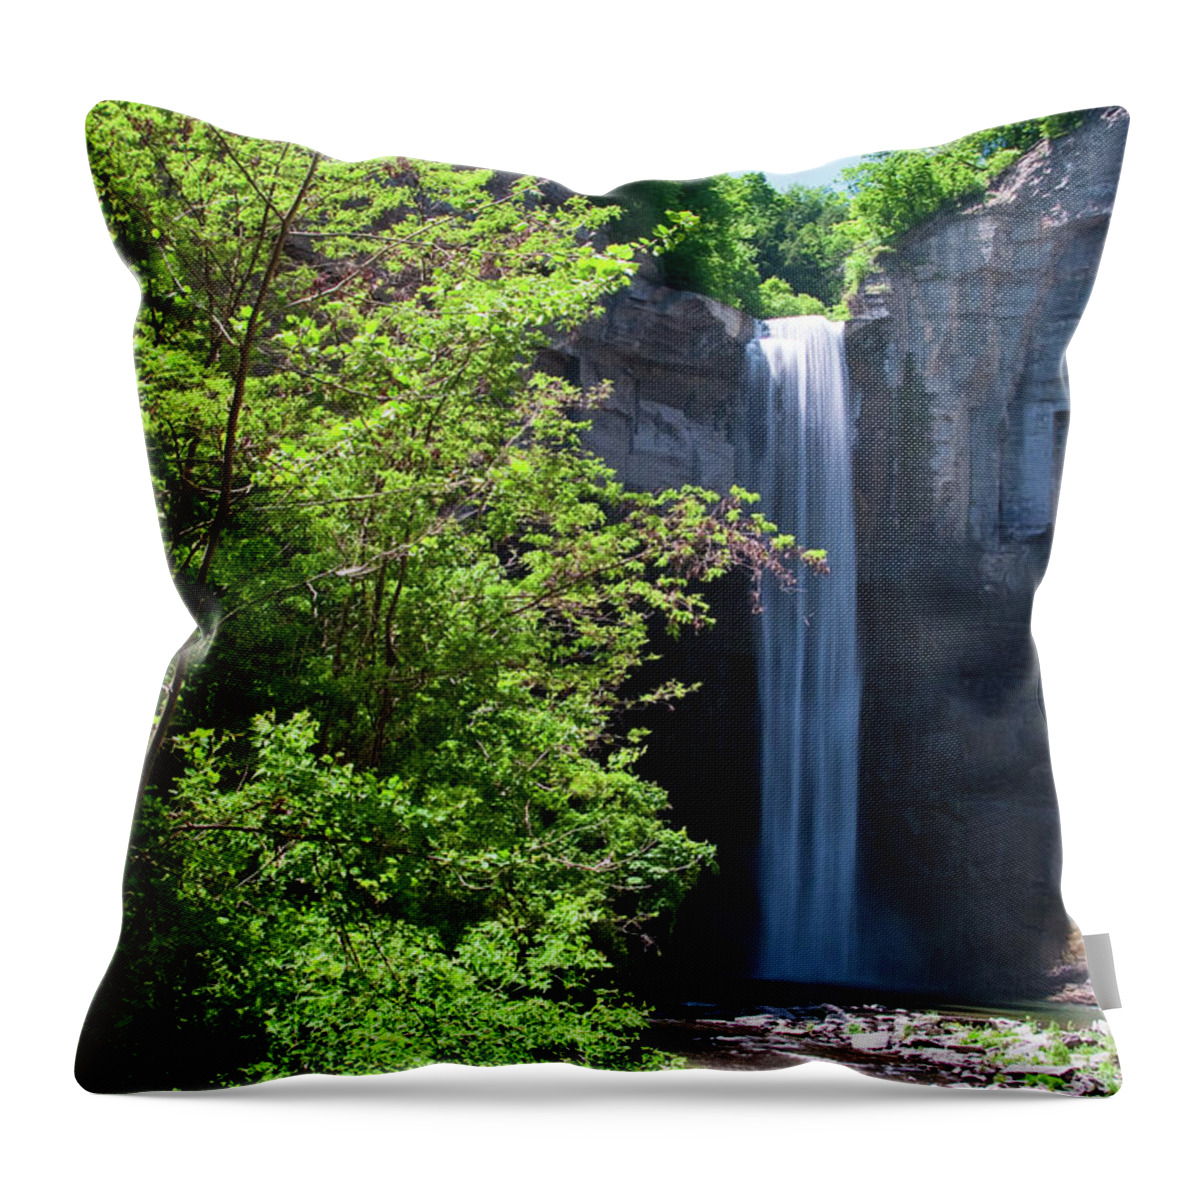 Water Throw Pillow featuring the photograph Taughannock Falls 0466 by Guy Whiteley